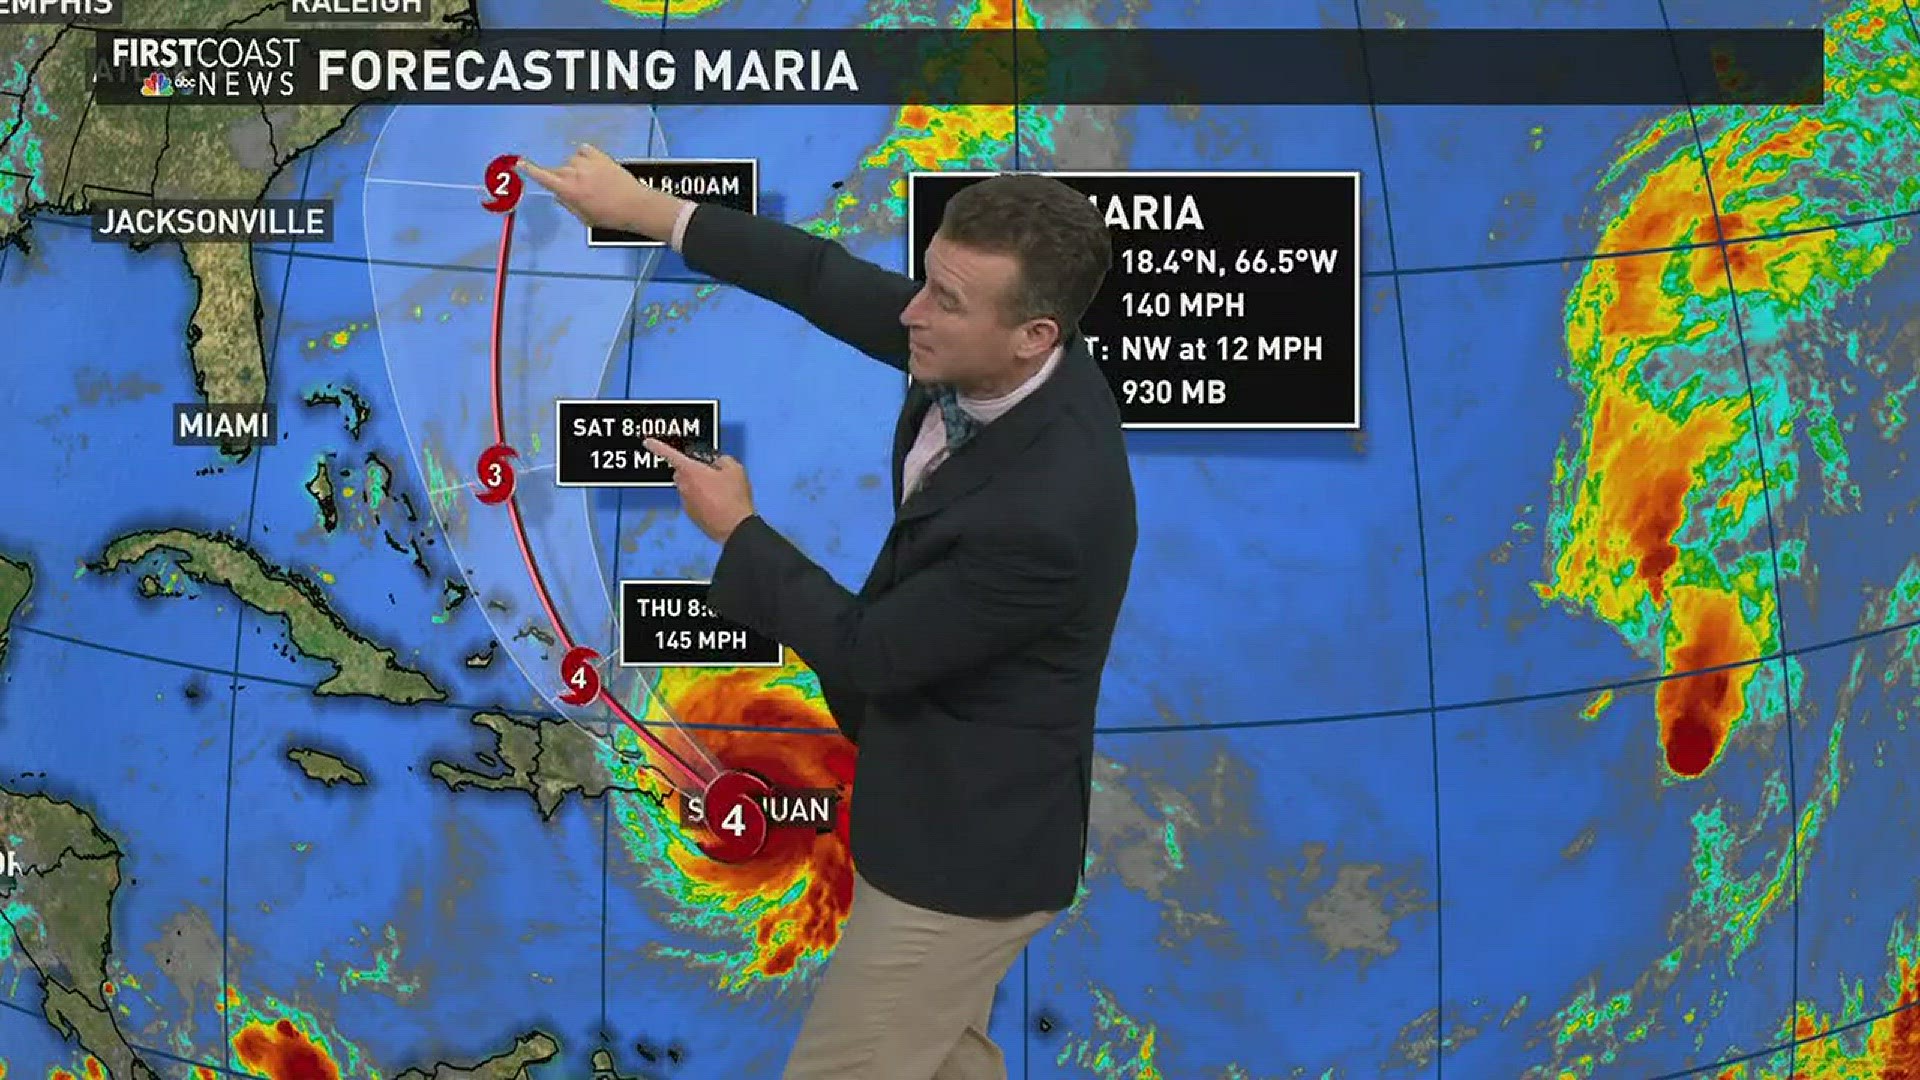 Maria's track after Puerto Rico